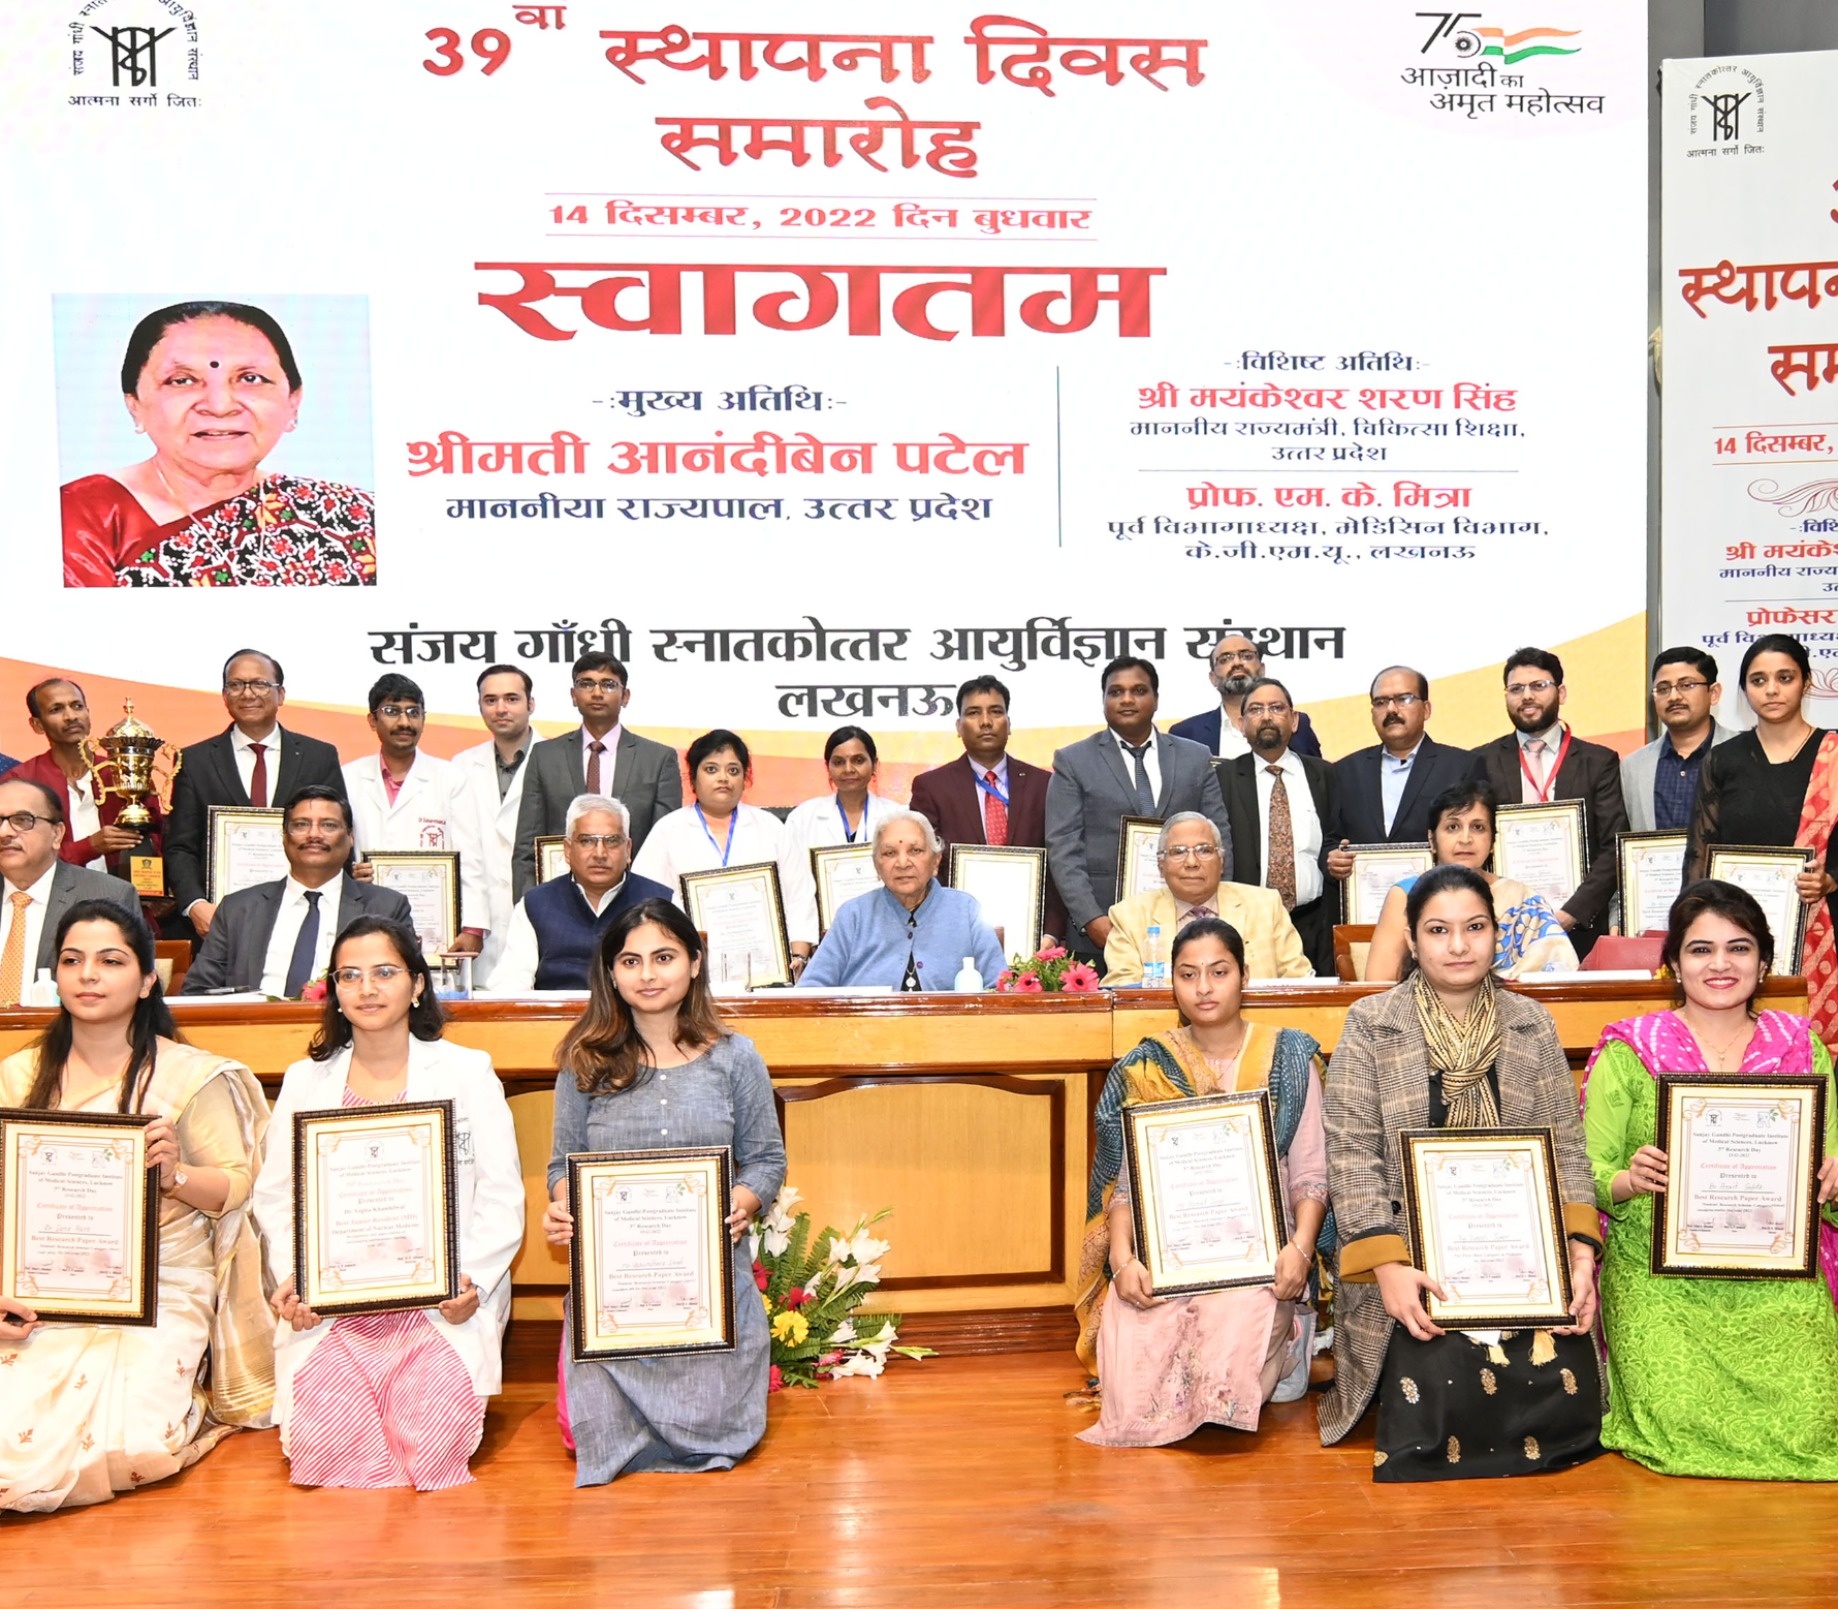 39th Foundation Day of Sanjay Gandhi Post Graduate Institute Lucknow concluded under the chairpersonship of the Governor